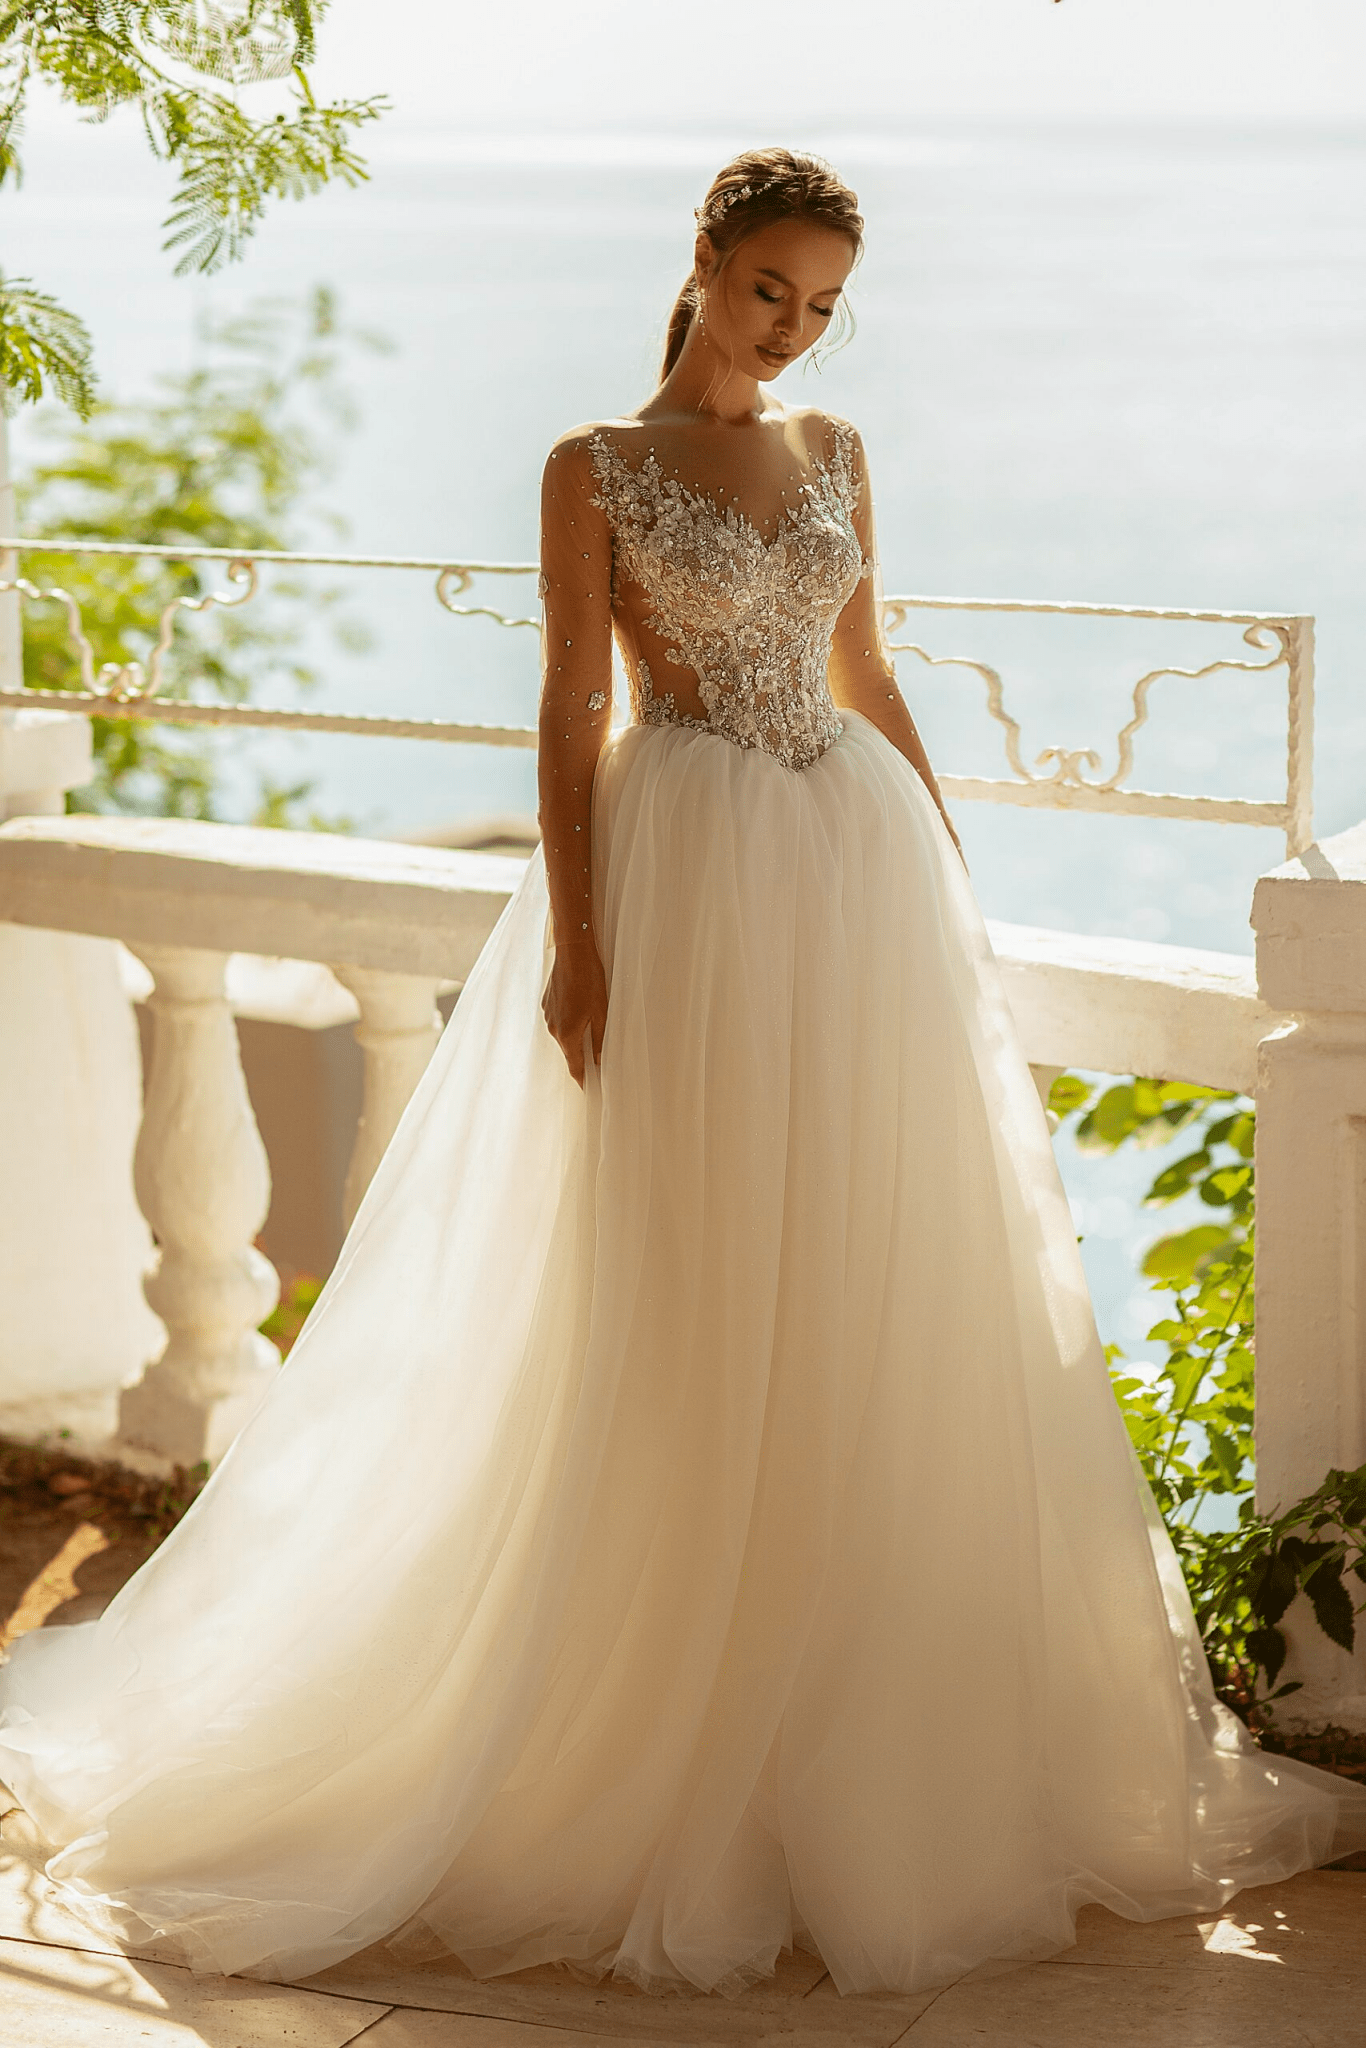 Aline Wedding Dress with Lace Sleeves - Floral Beaded Dress - Lace Bodice Wedding Gown Plus Size - WonderlandByLilian